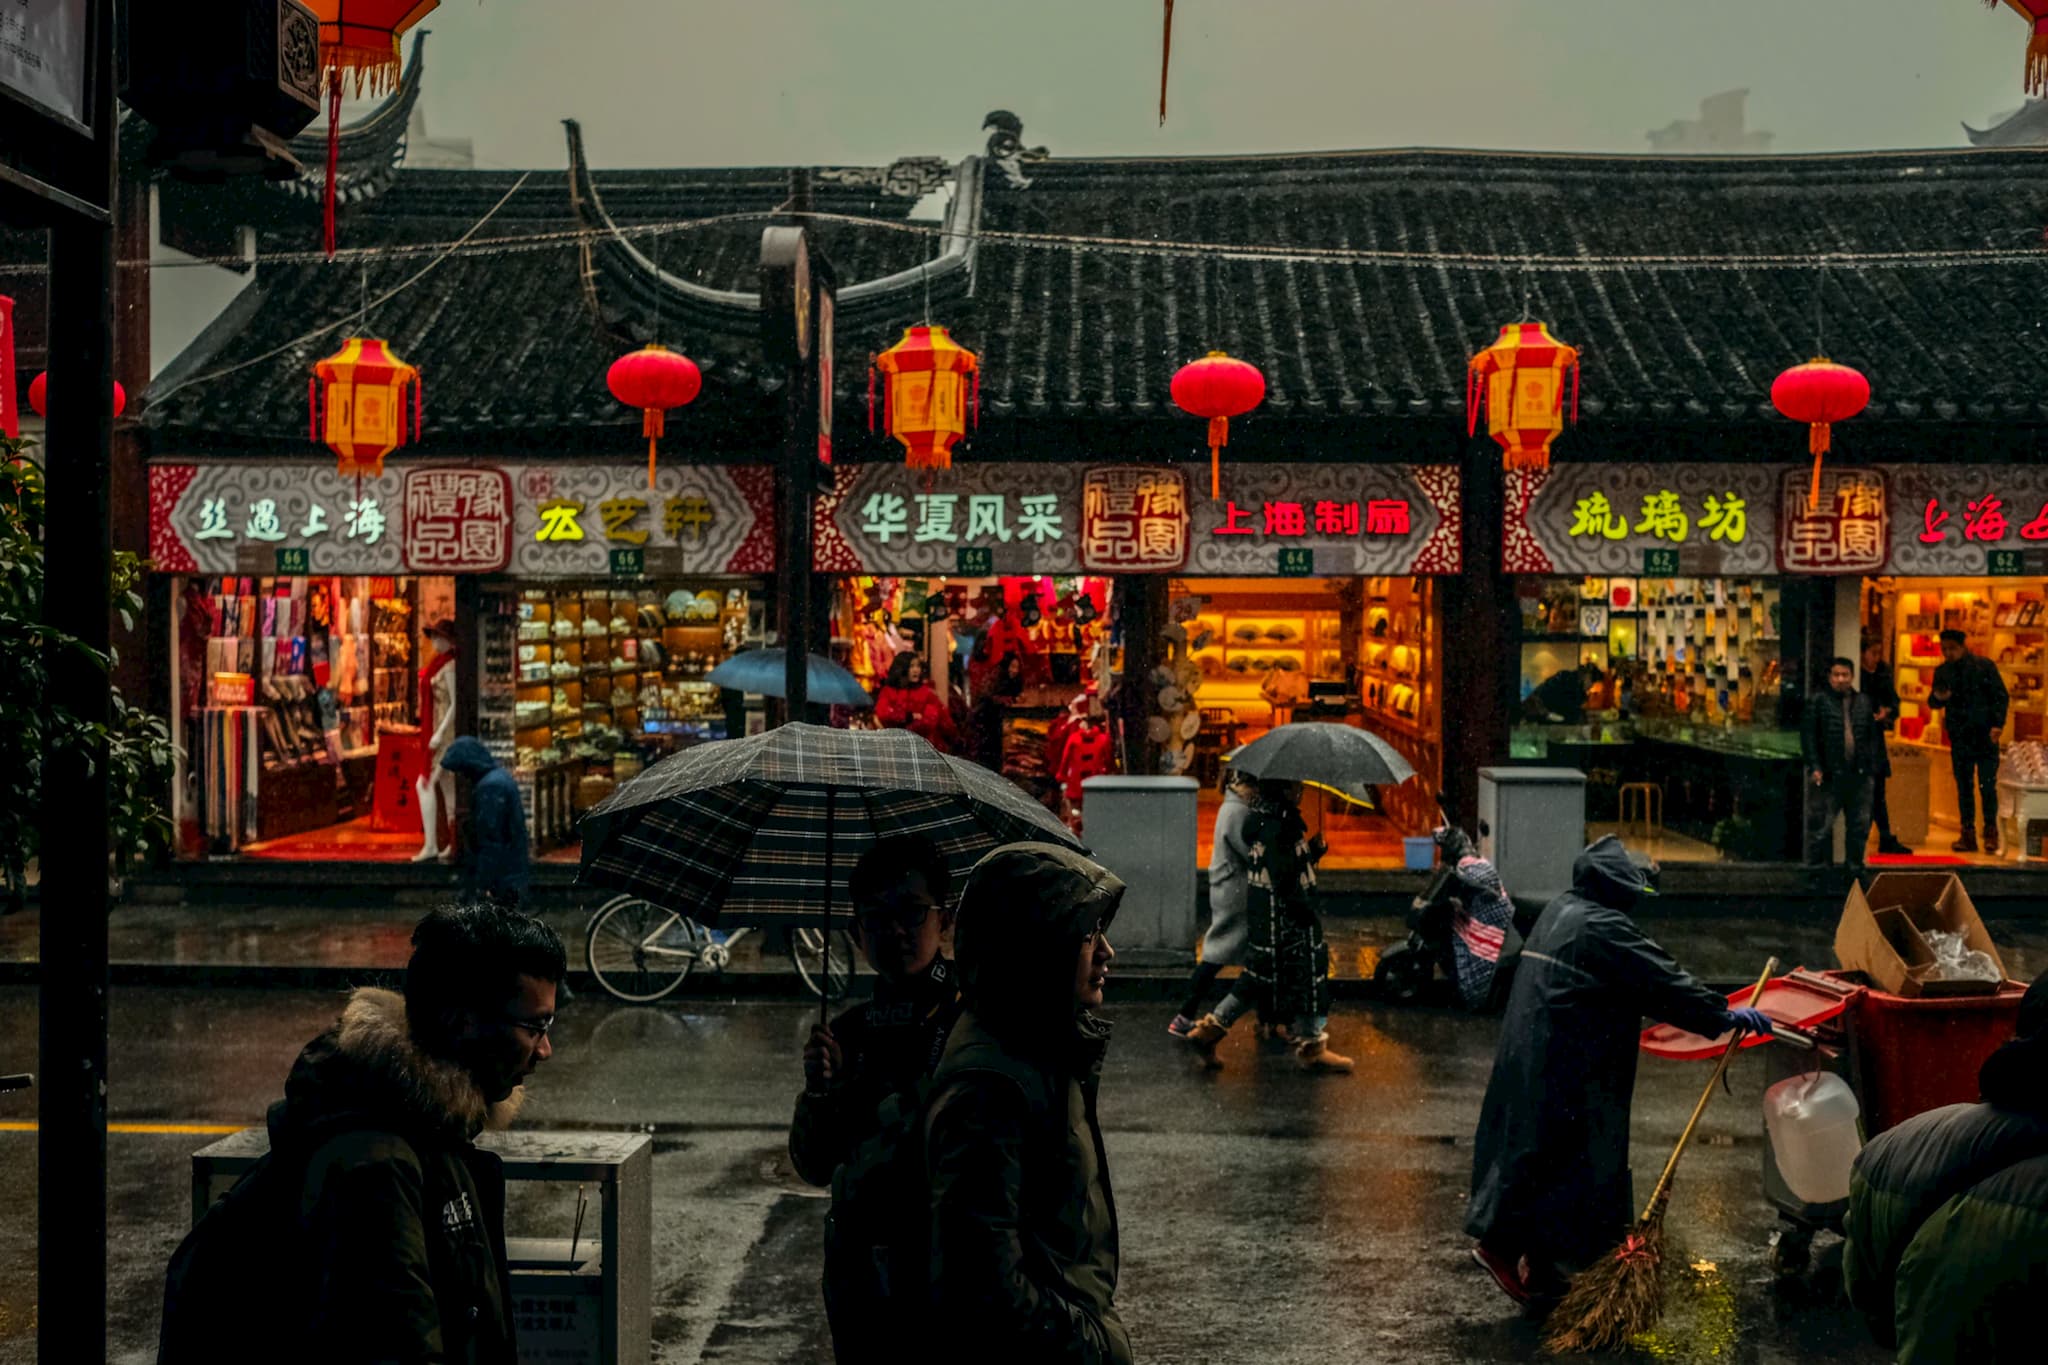 People walking and shopping in the rain in Shanghai, China.